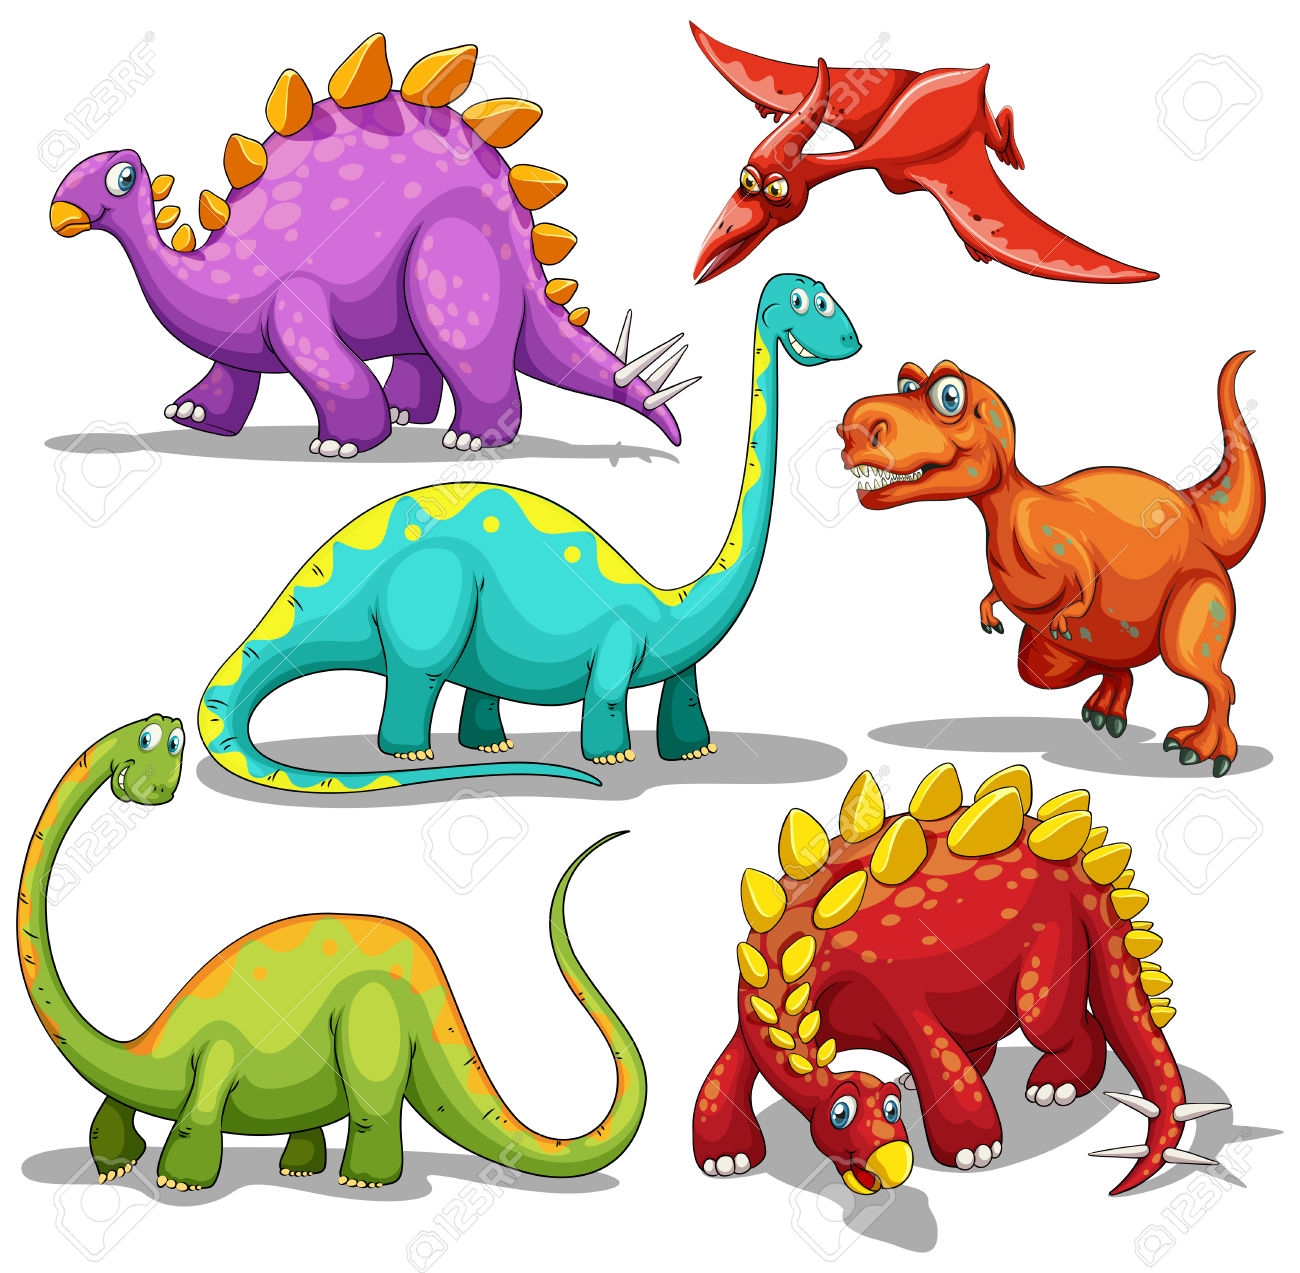 dinosaurs-list-of-types-names-with-facts-pictures